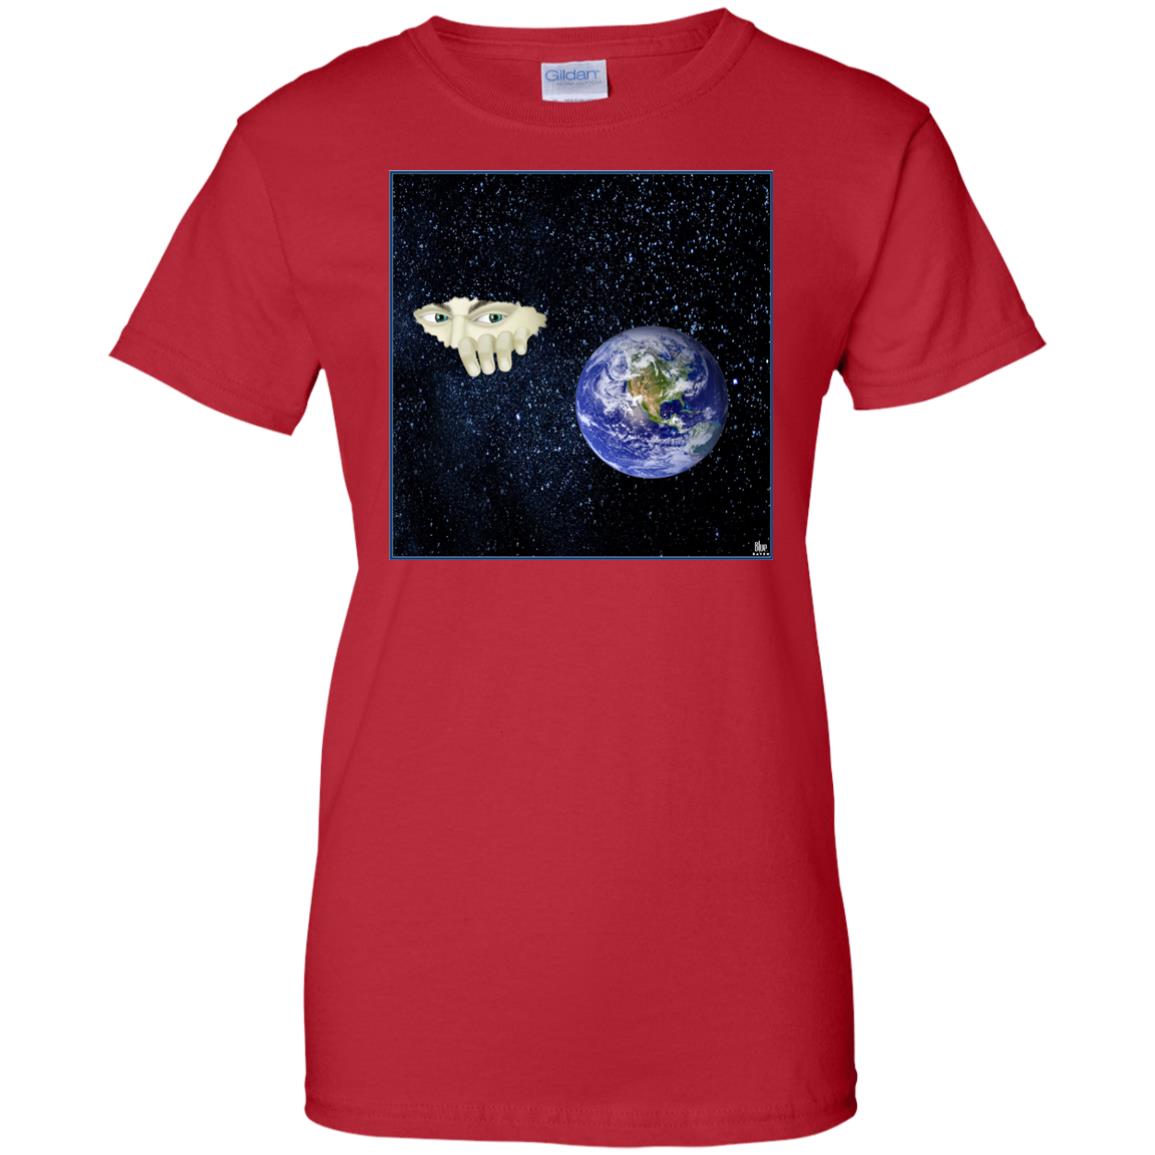 SOMEWHERE OUT THERE - Women's Relaxed Fit T-Shirt